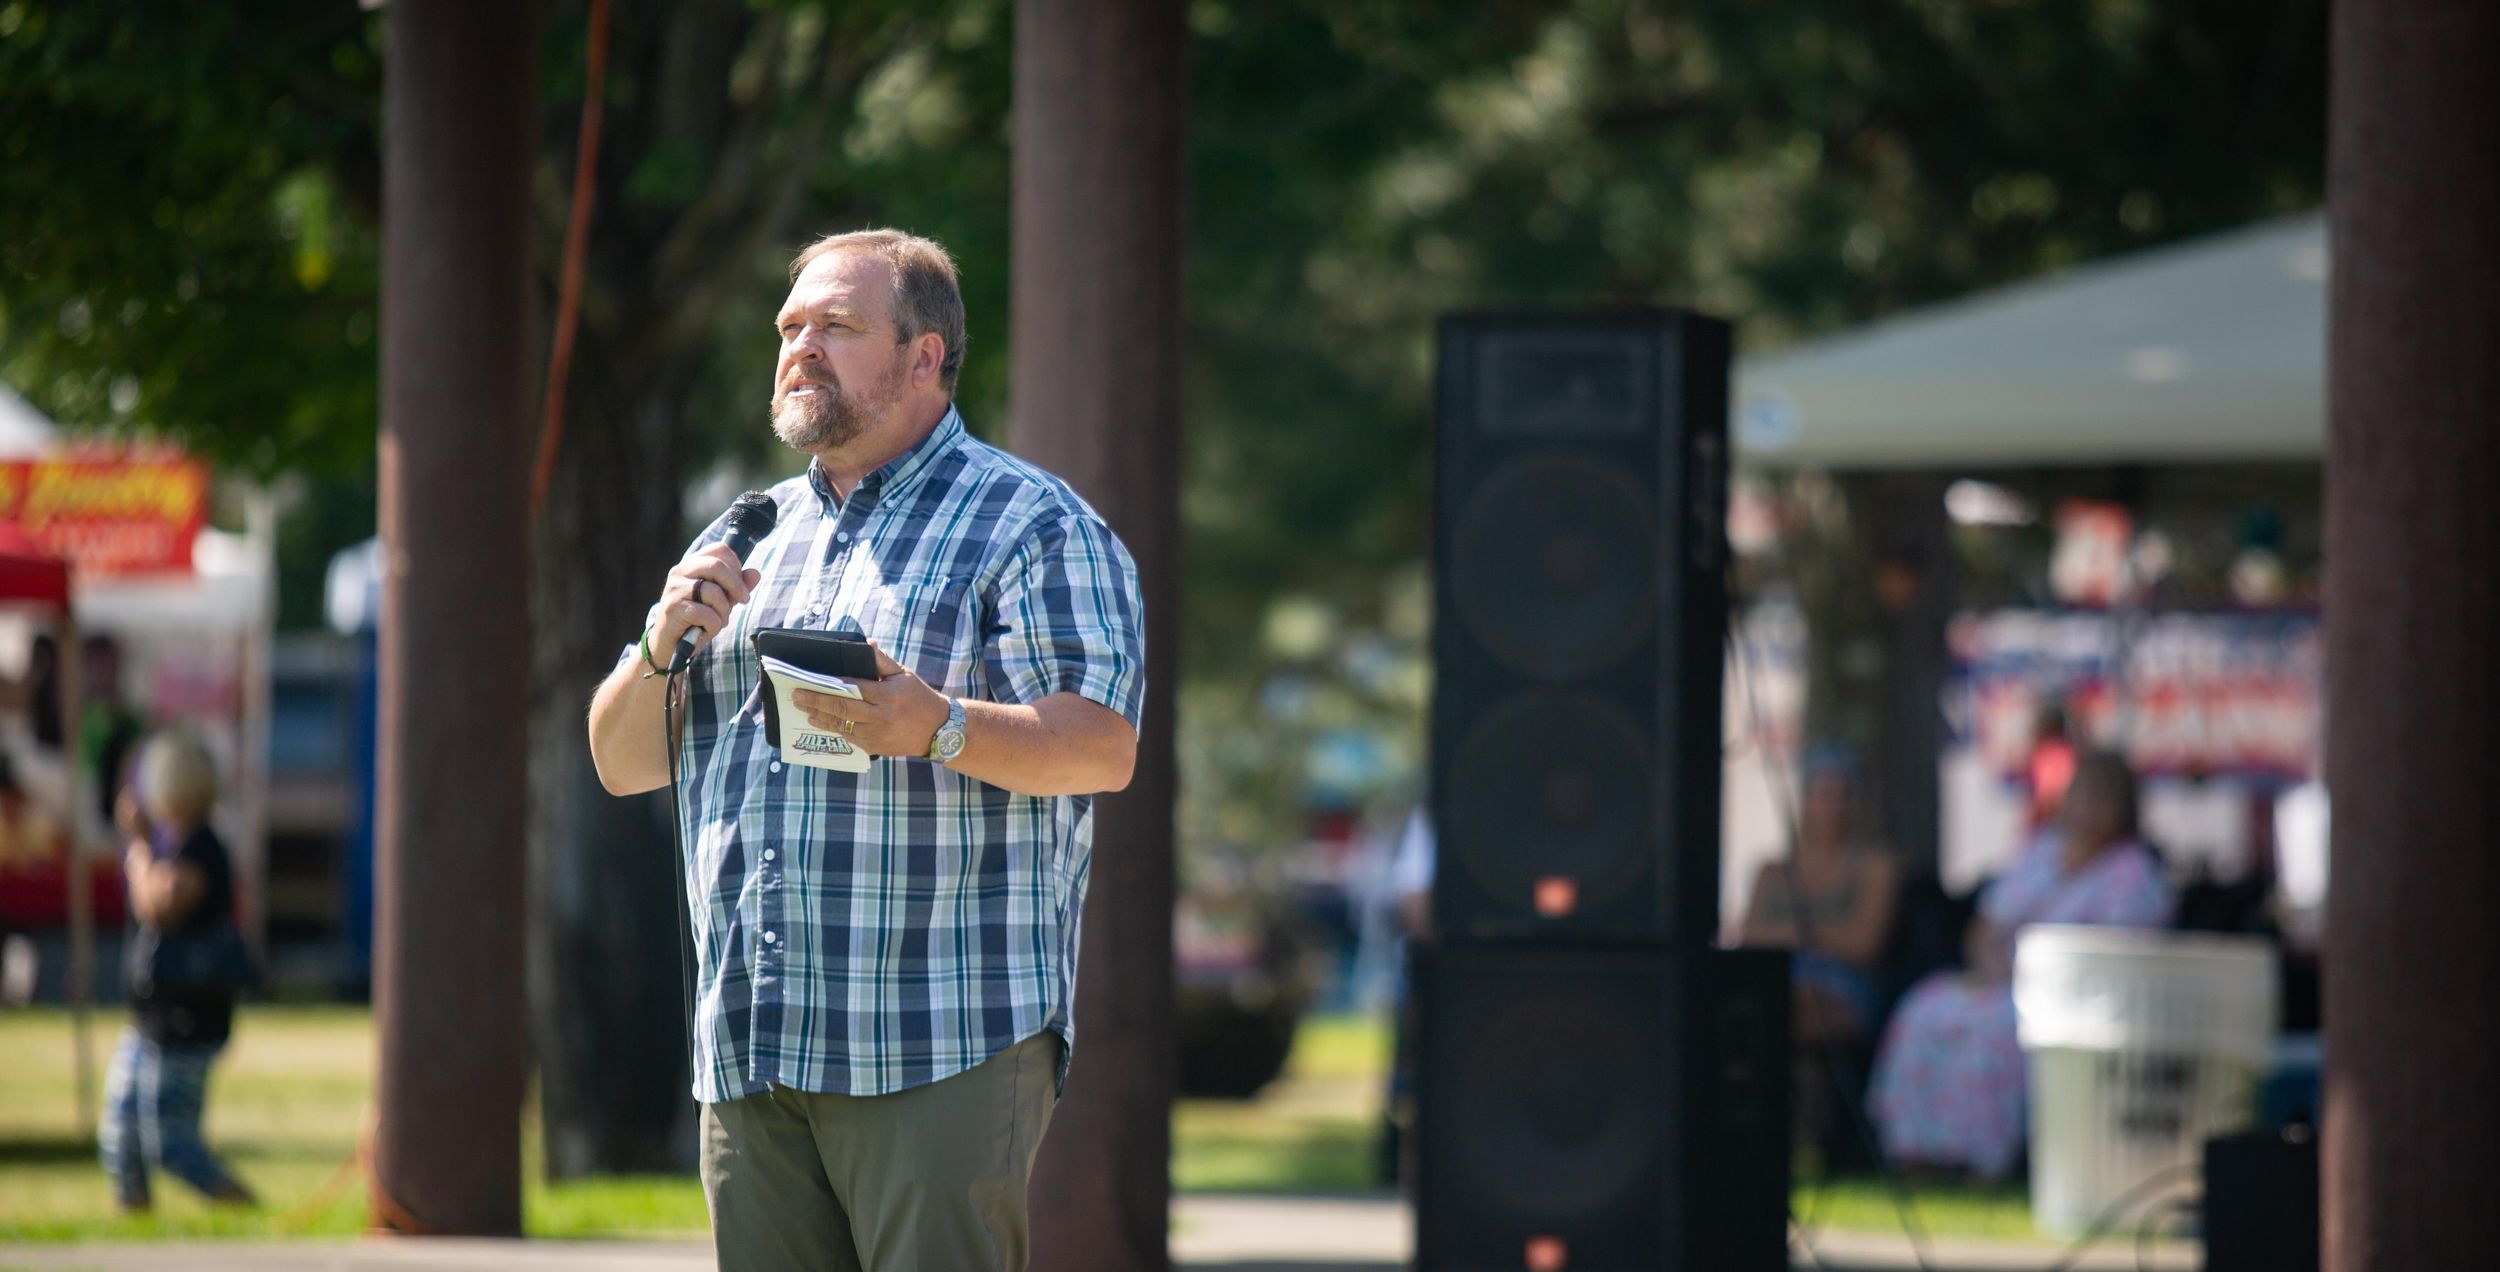 Hillyard Festival Aug. 4, 2019 The SpokesmanReview